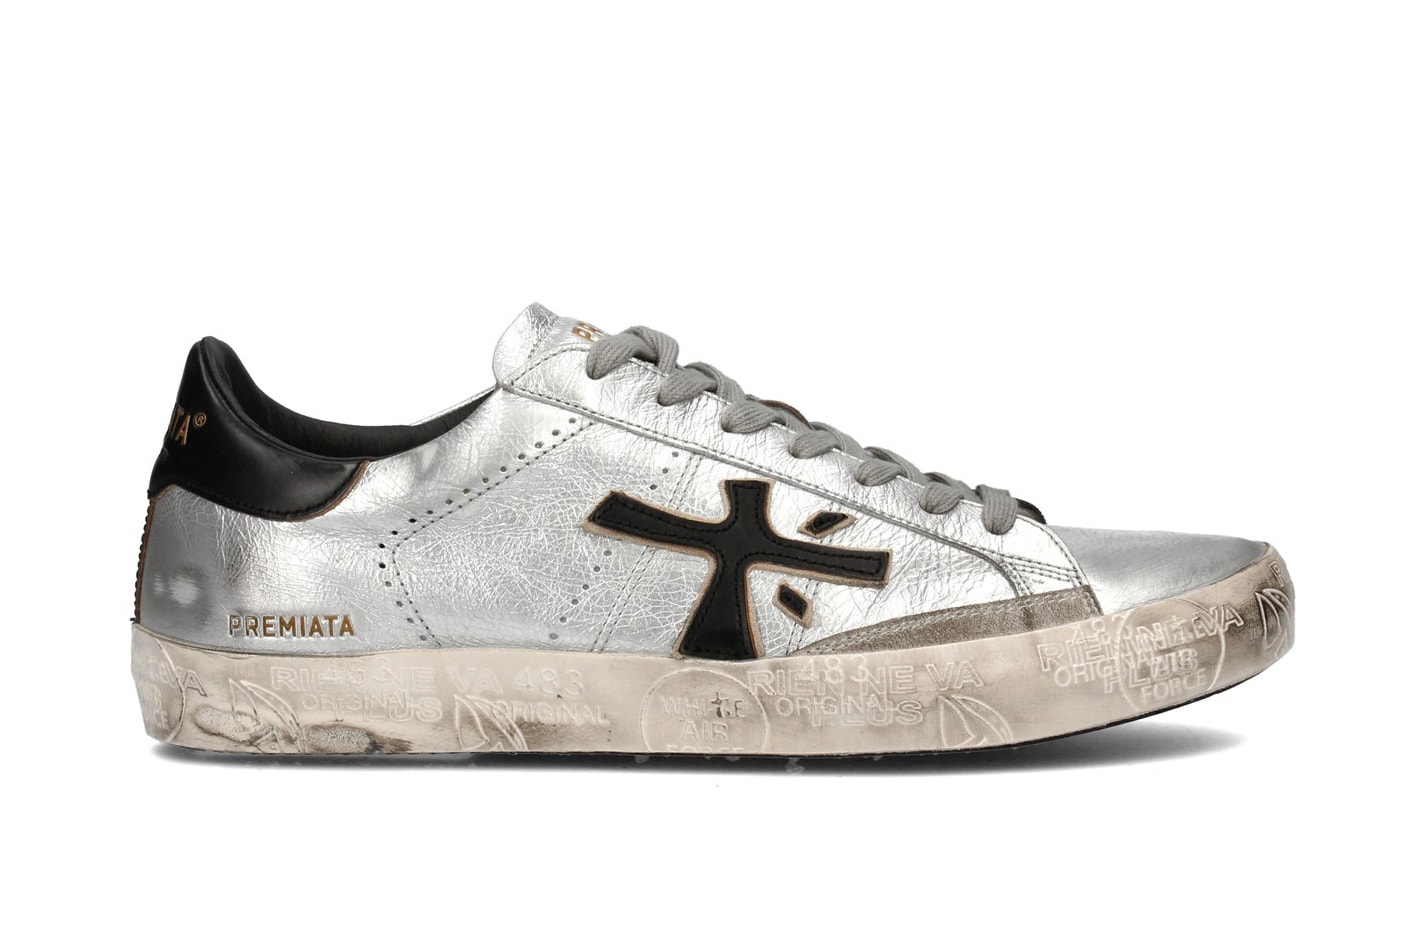 premiata ss20 steven collection range sneakers footwear timeless court classic 90s